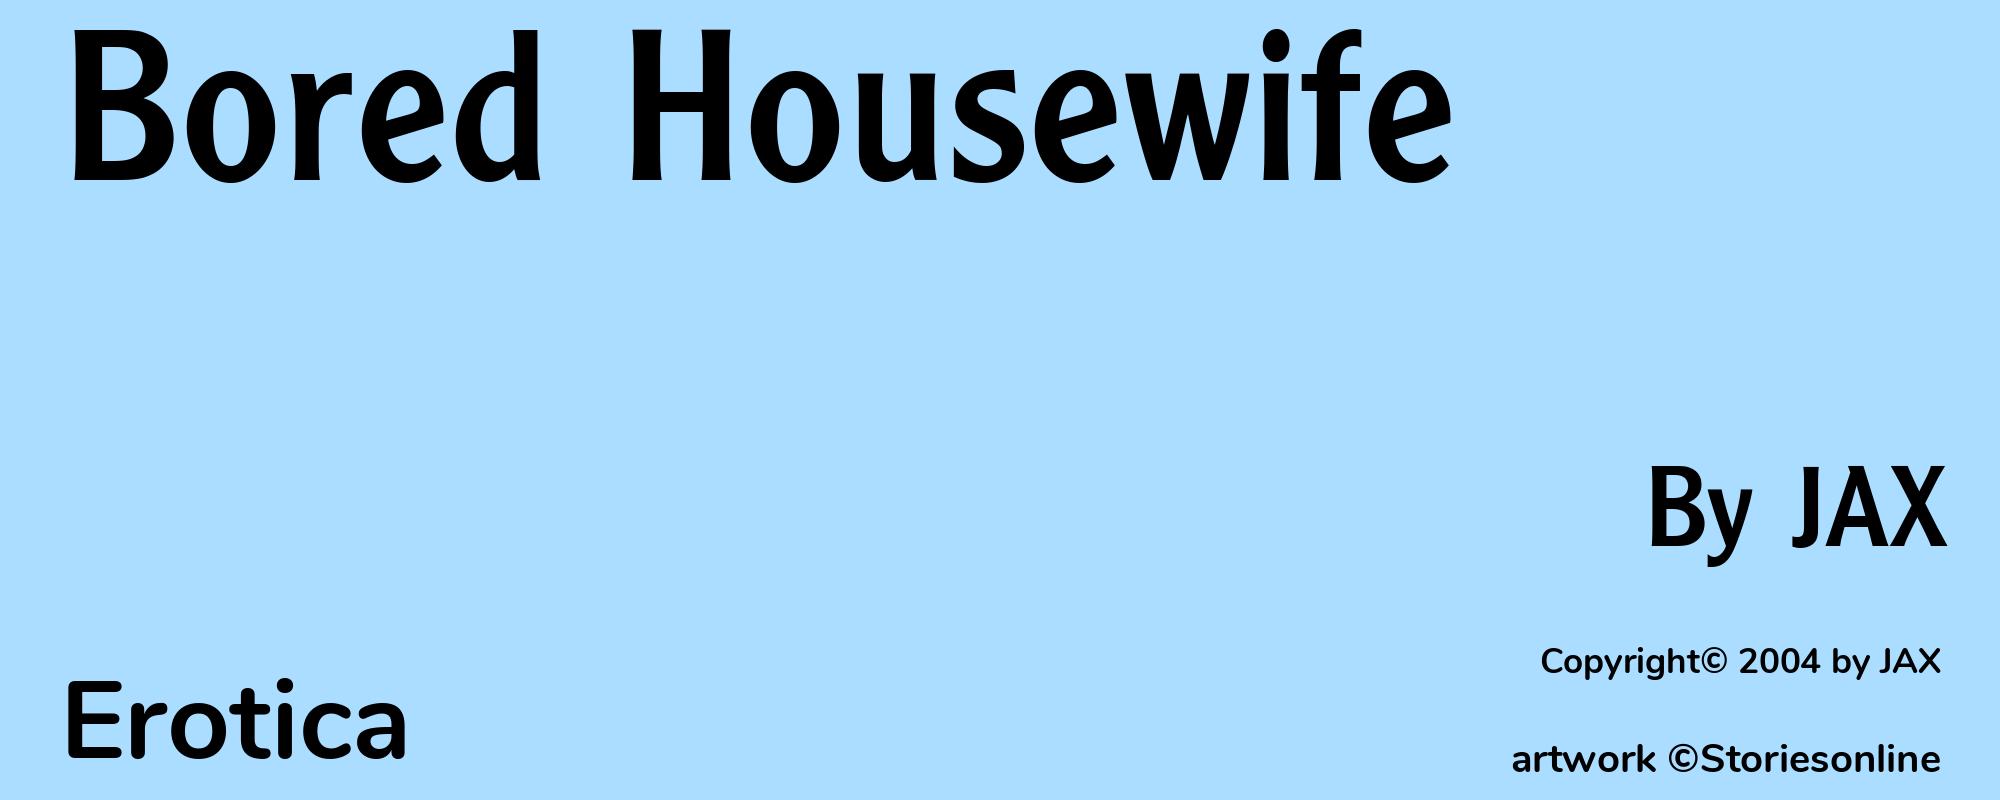 Bored Housewife - Cover